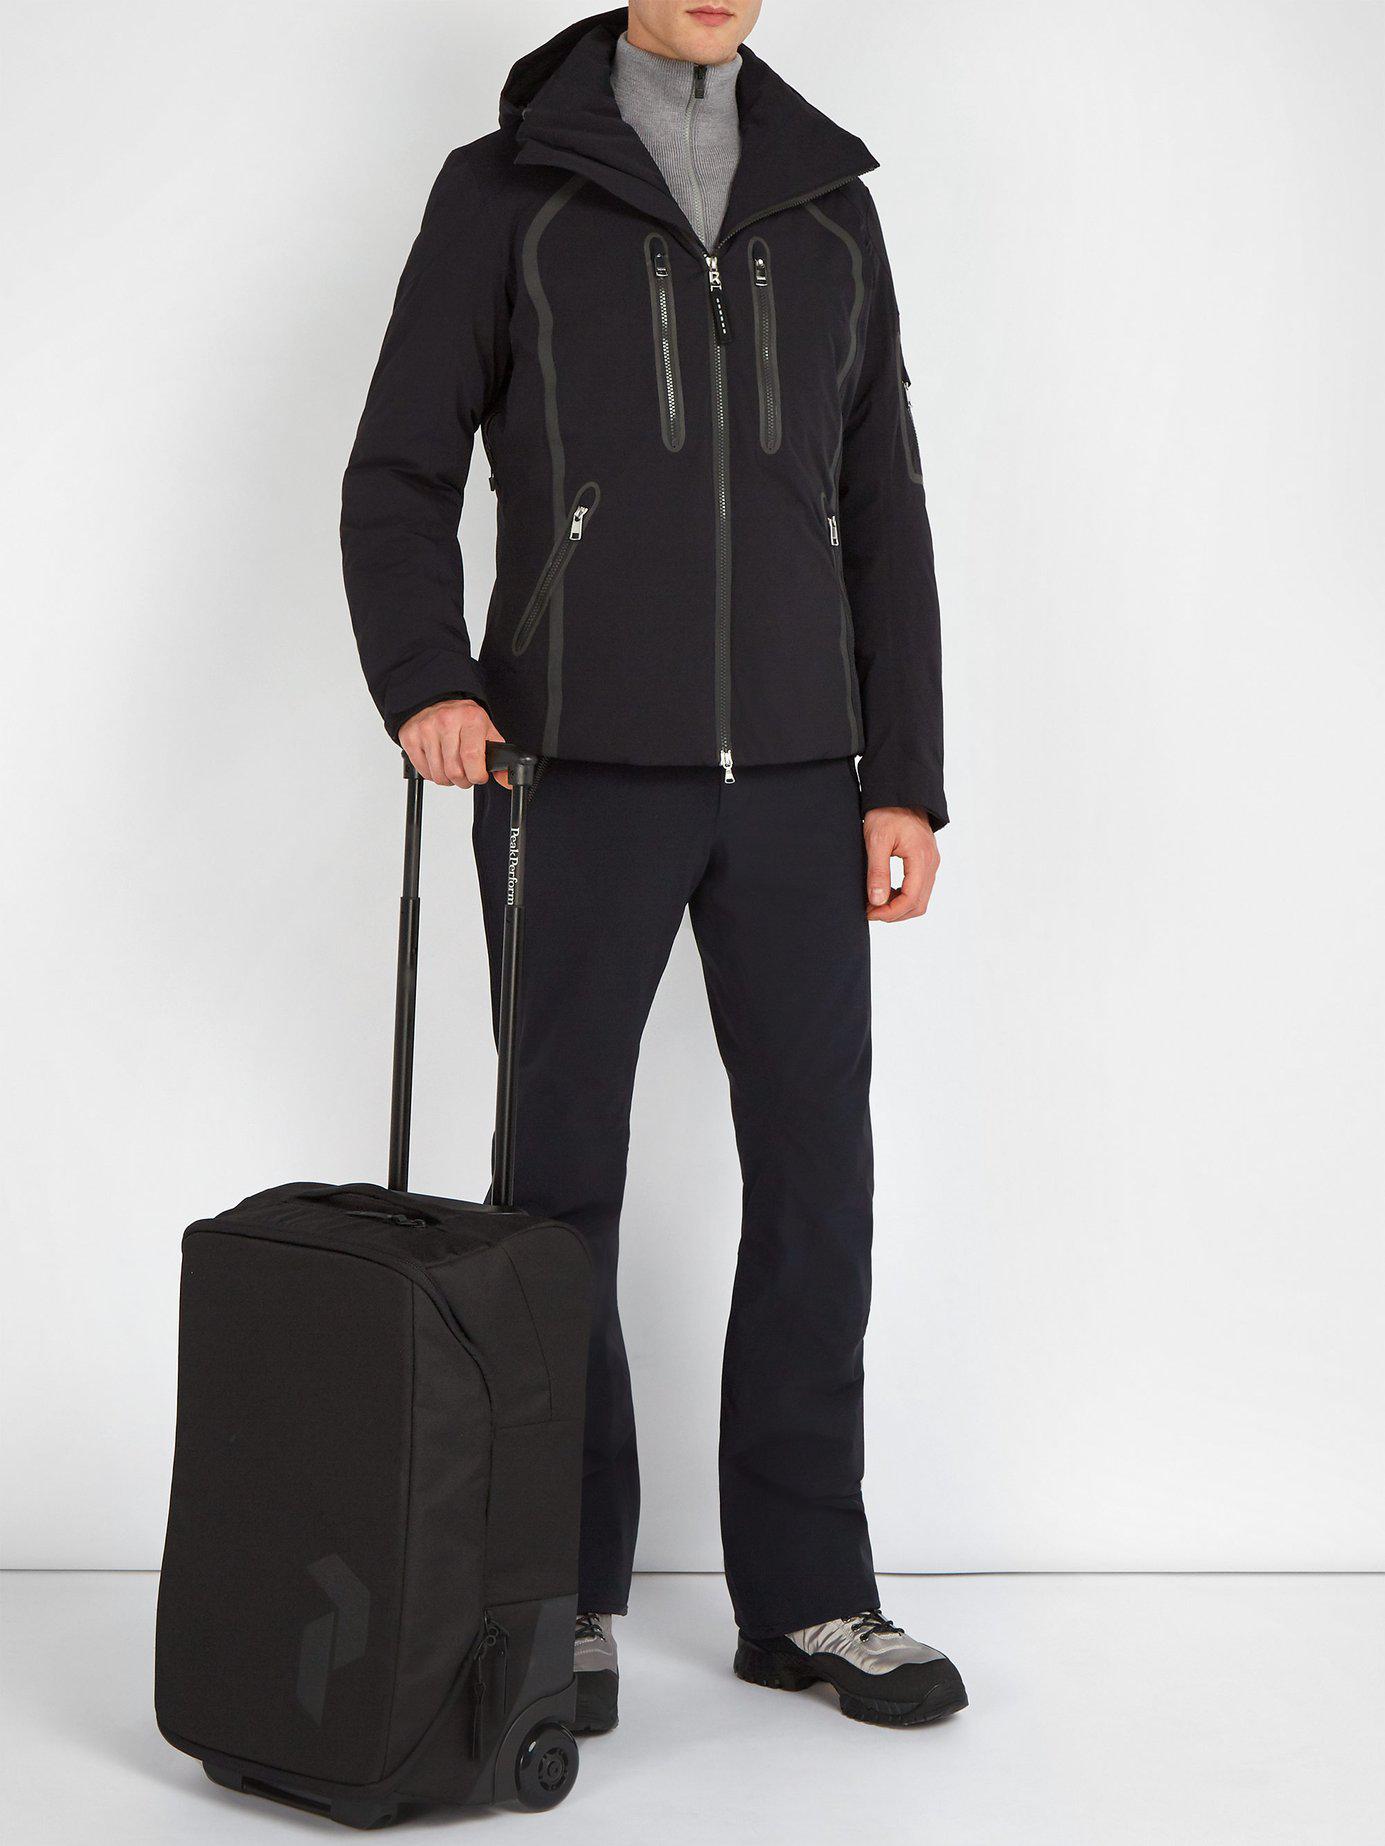 Peak Performance Small Cabin Suitcase in Black for Men | Lyst